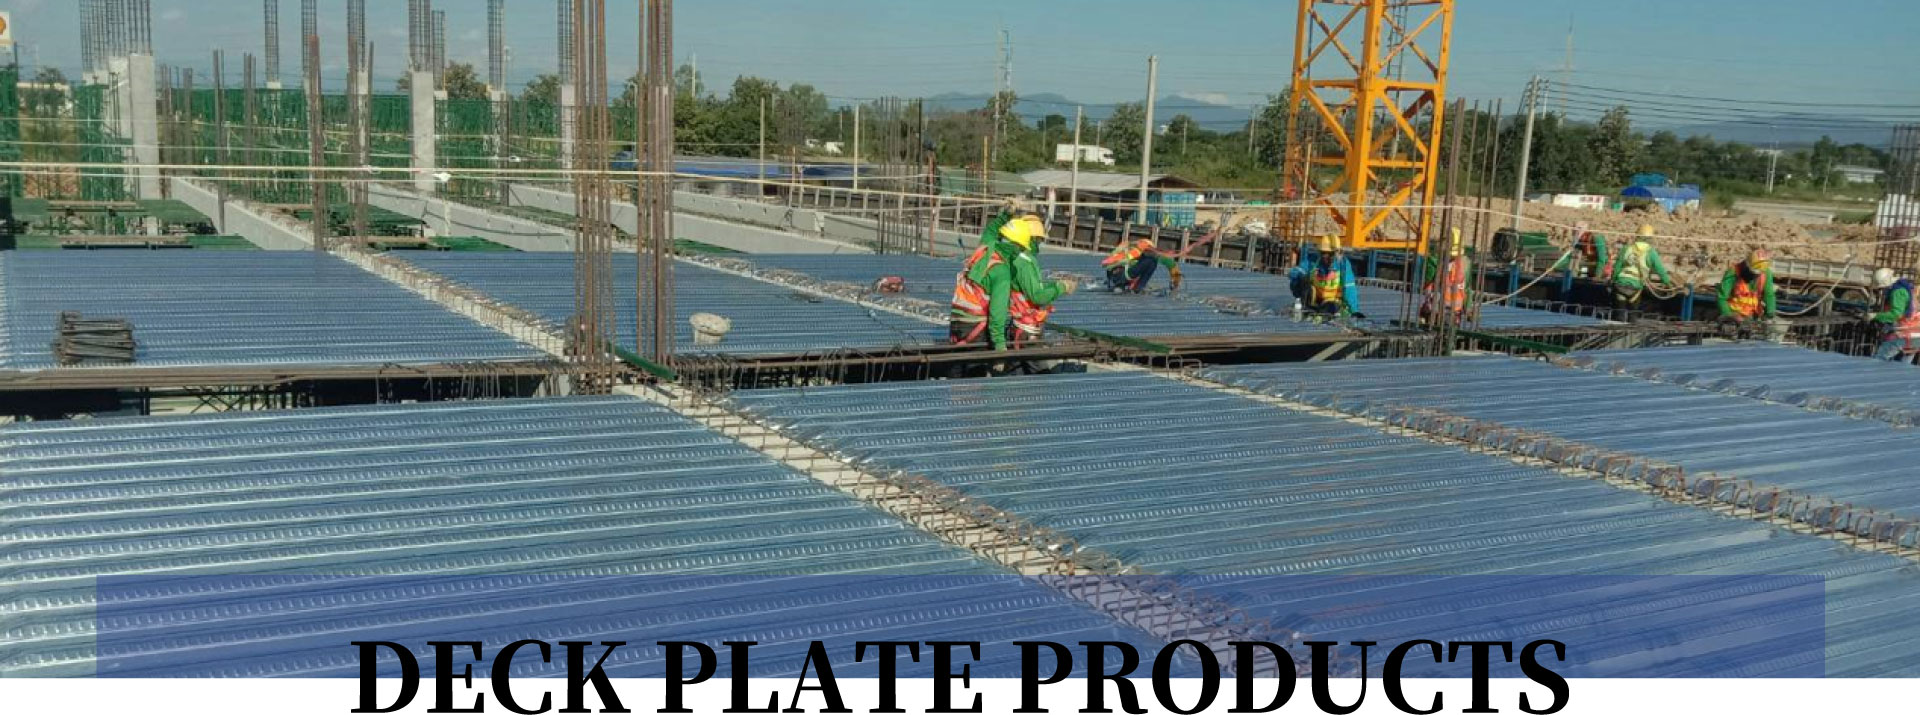 DECK PLATE PRODUCTS